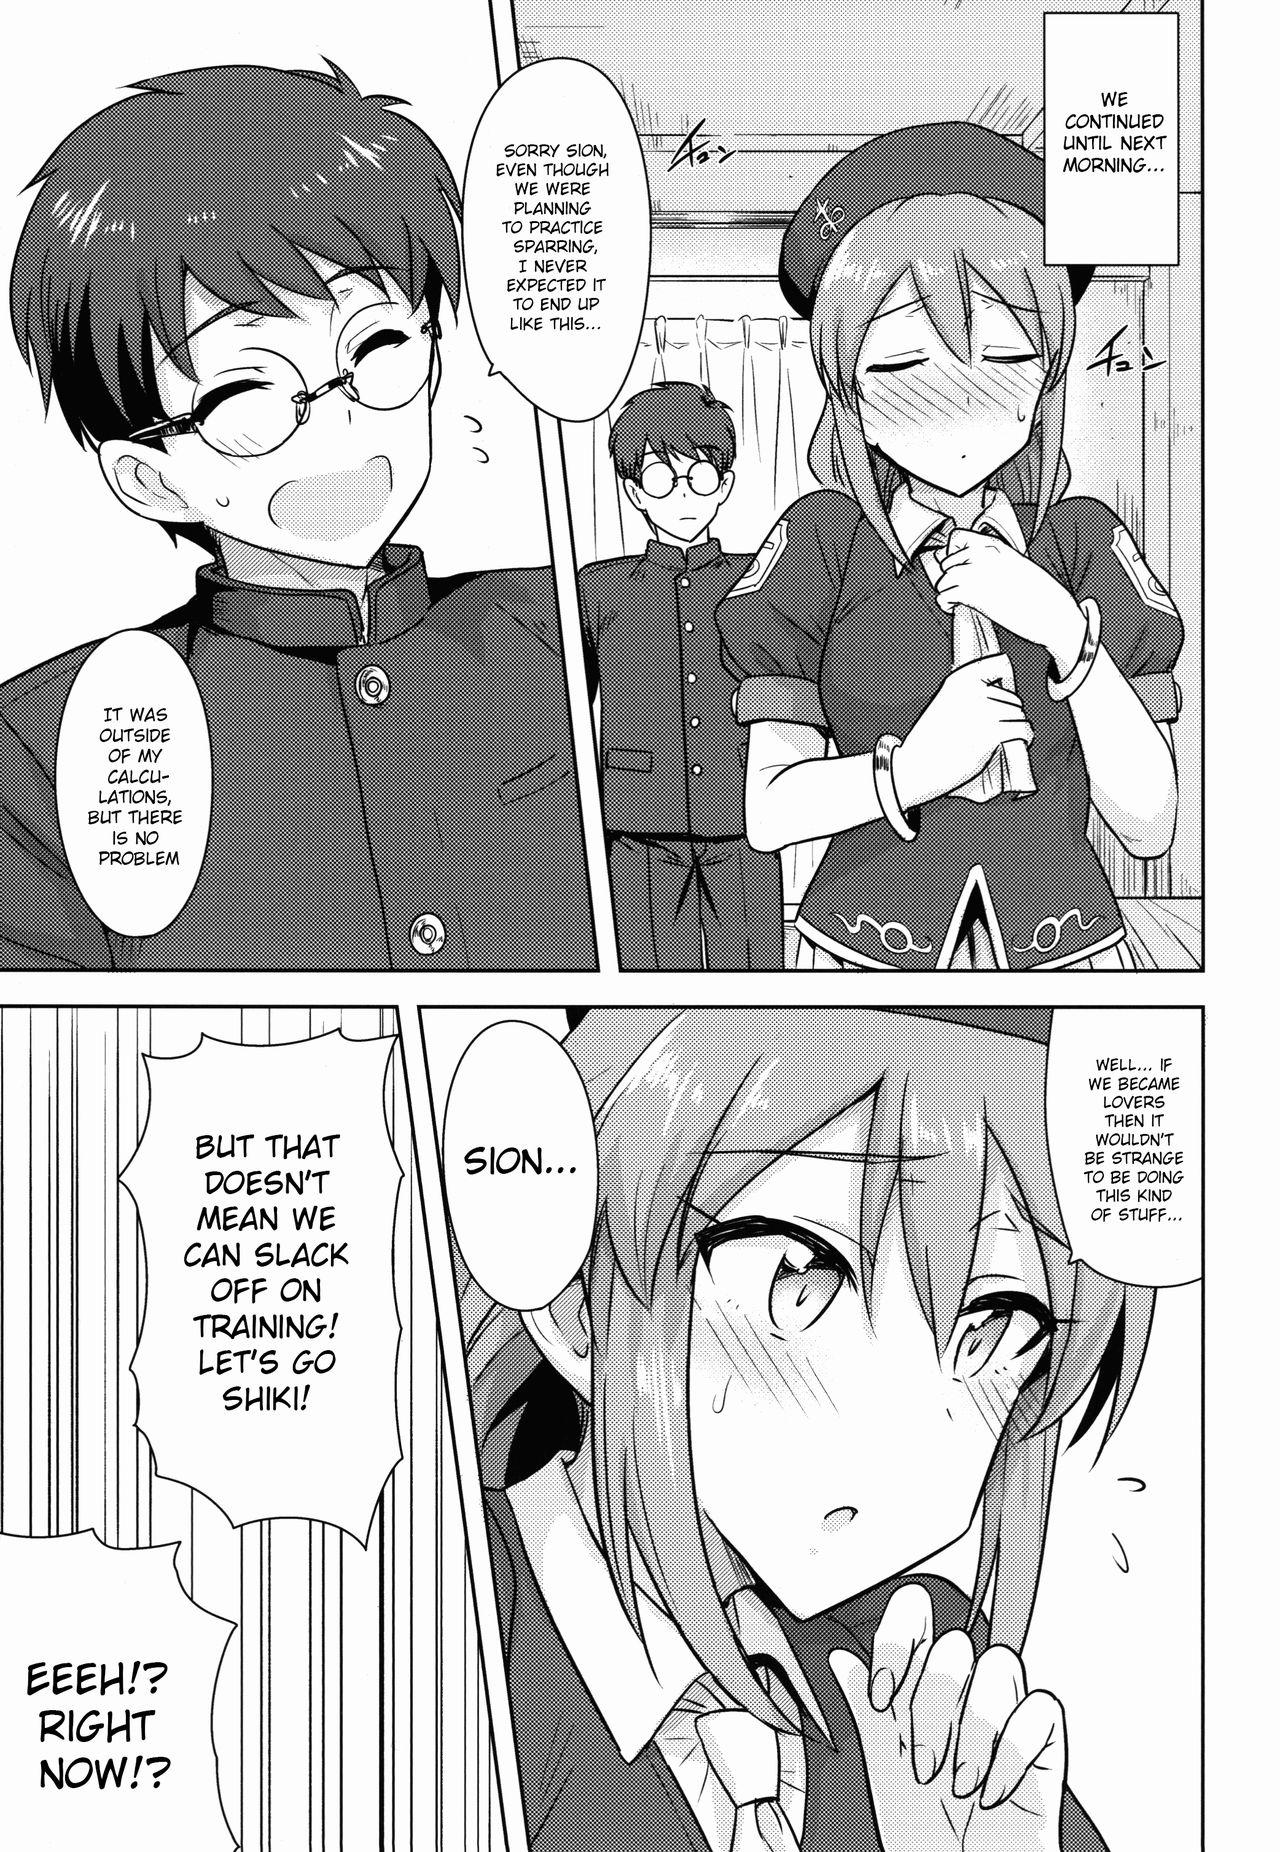 Lez Aru Hi no Futari MelBlo Hen | A Certain Day with Each Other Melty Blood Hen - Tsukihime Hot Fuck - Page 8